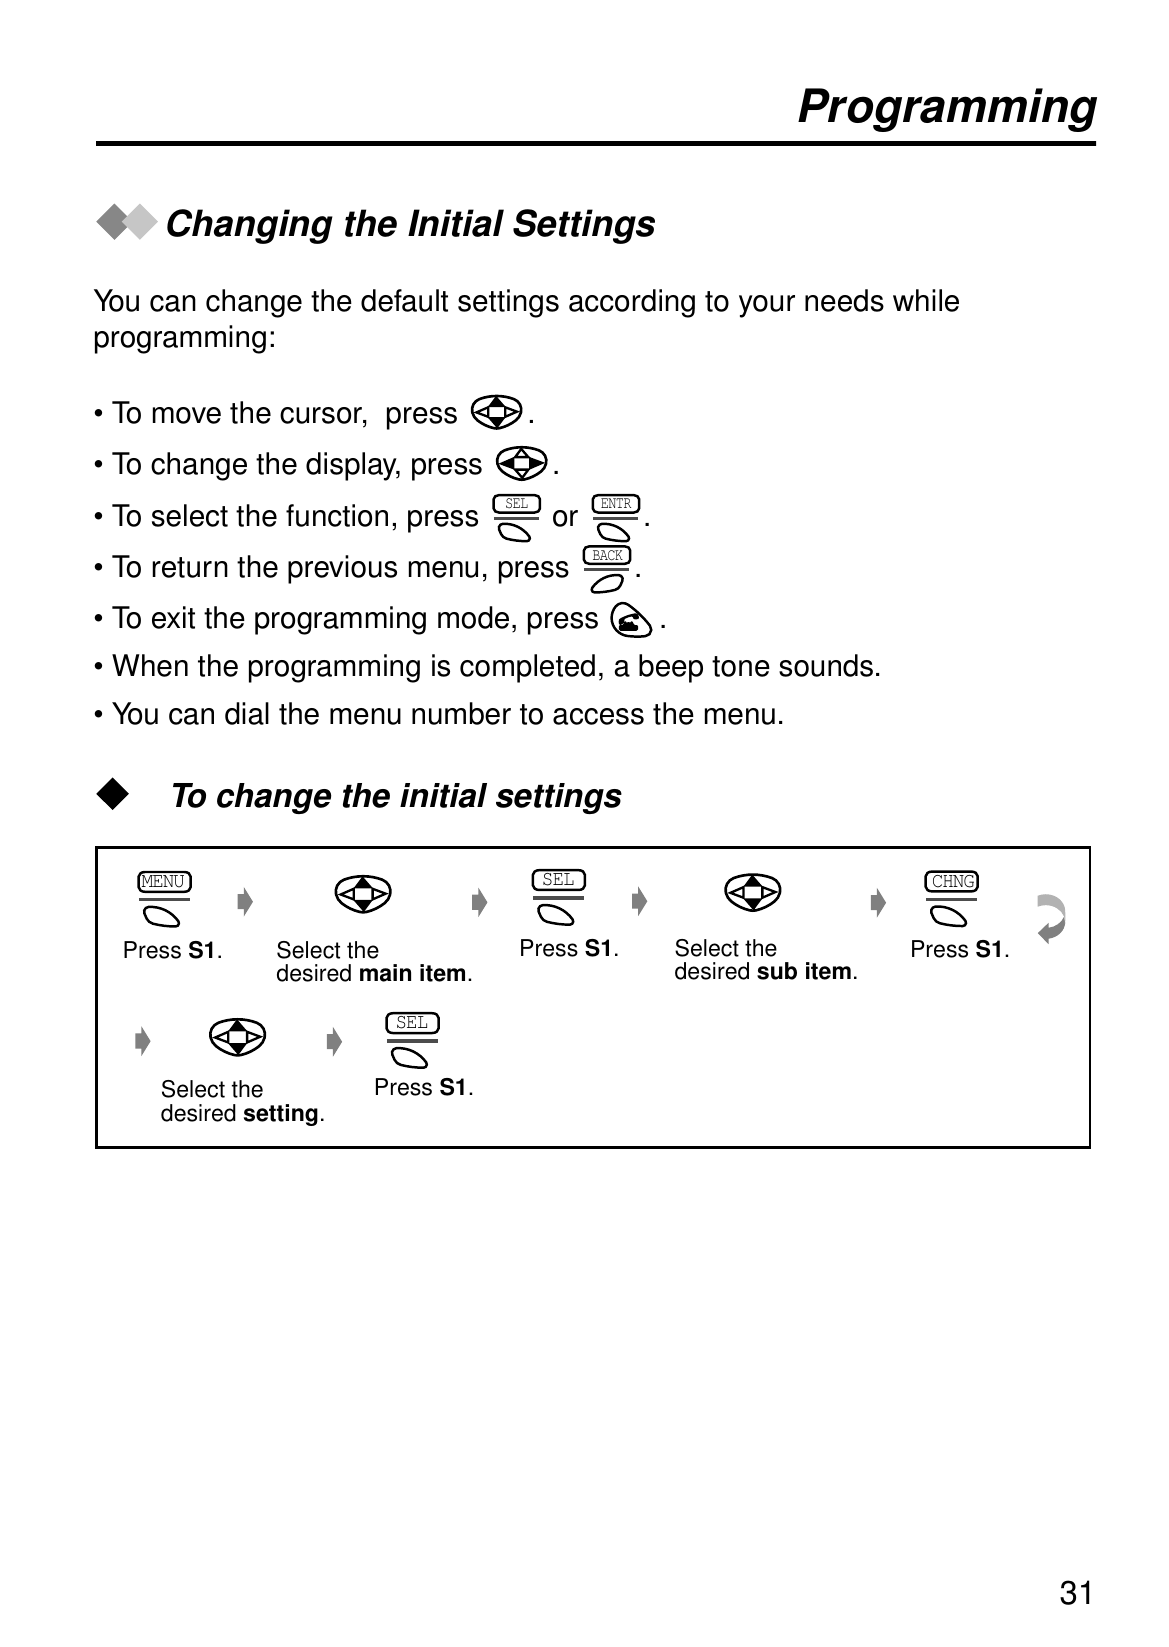 31ProgrammingChanging the Initial SettingsYou can change the default settings according to your needs while programming:• To move the cursor,  press  .• To change the display, press  .• To select the function, press   or  .• To return the previous menu, press  .• To exit the programming mode, press  . • When the programming is completed, a beep tone sounds.• You can dial the menu number to access the menu.  To change the initial settingsSEL ENTRBACKSelect the desired main item.Press S1.MENUPress S1.SELSelect the desired sub item.Press S1.CHNGSelect the desired setting.Press S1.SEL